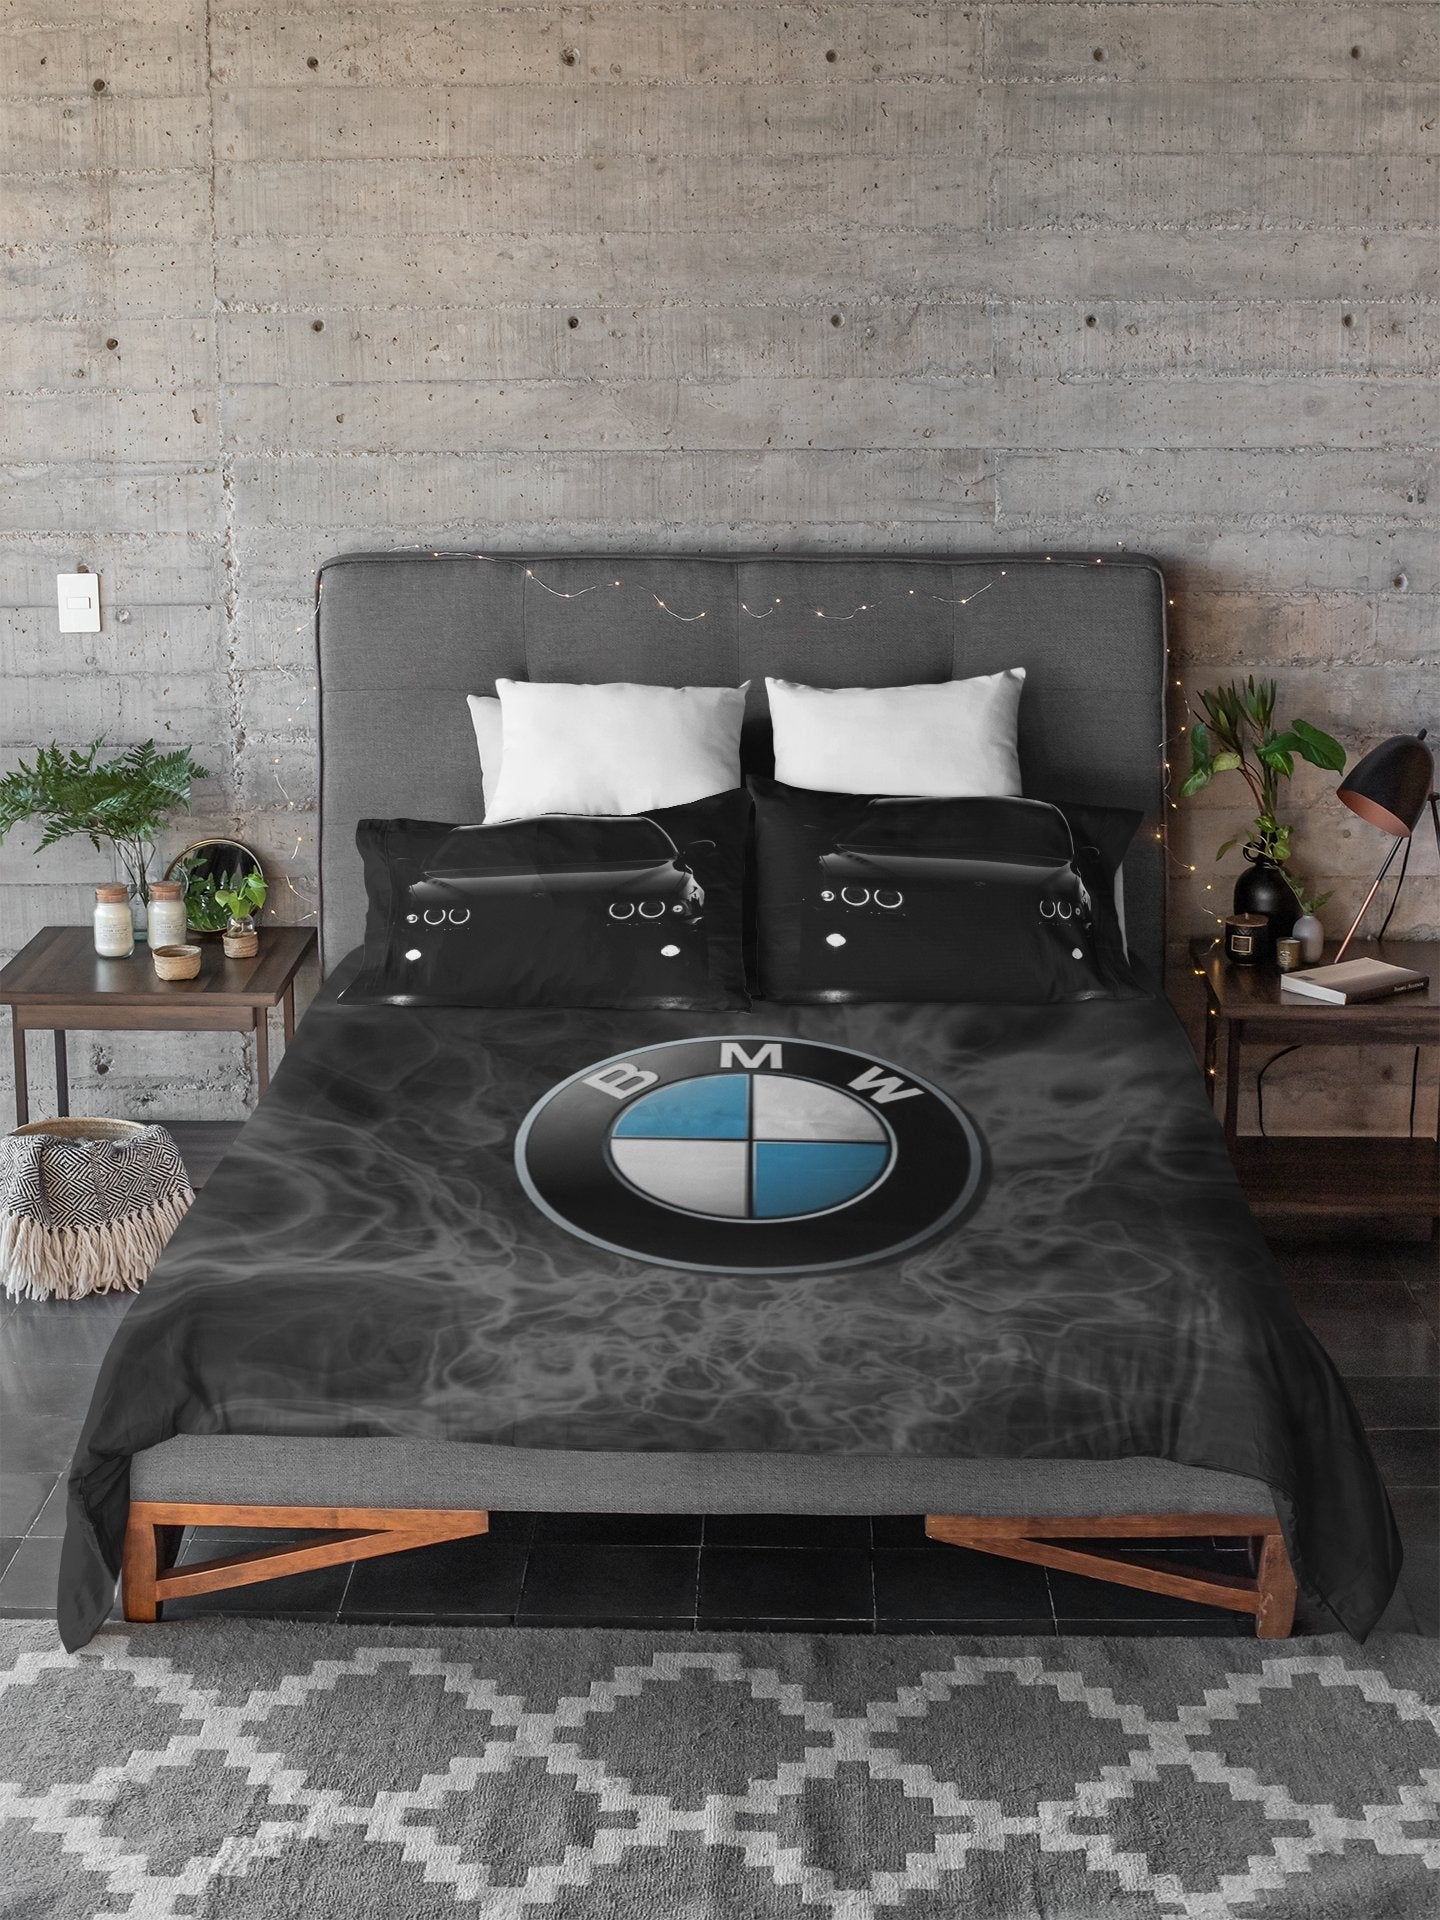 BMW Bed Sheets Set, Luxury Bedsheets